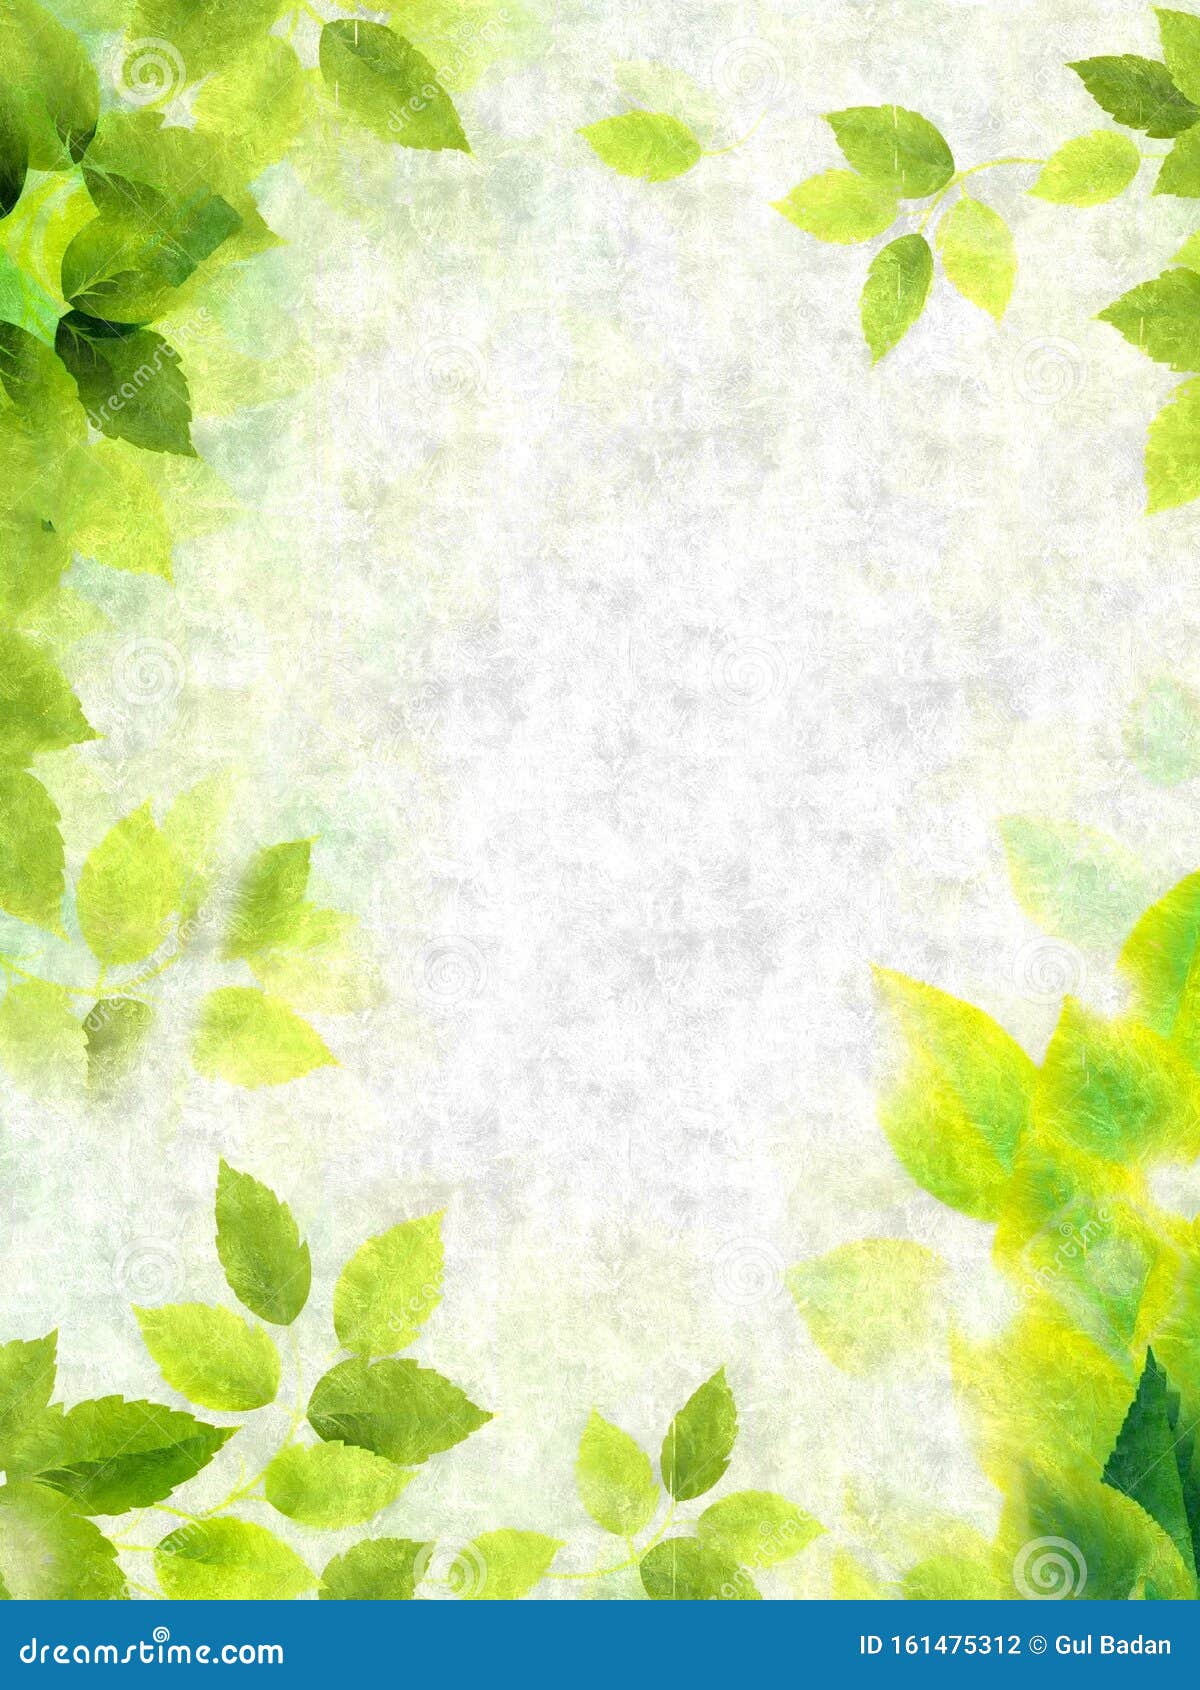 Green Leave Abstract Wallpaper Background Color Beautiful Stock Photo -  Image of background, wallpaper: 161475312